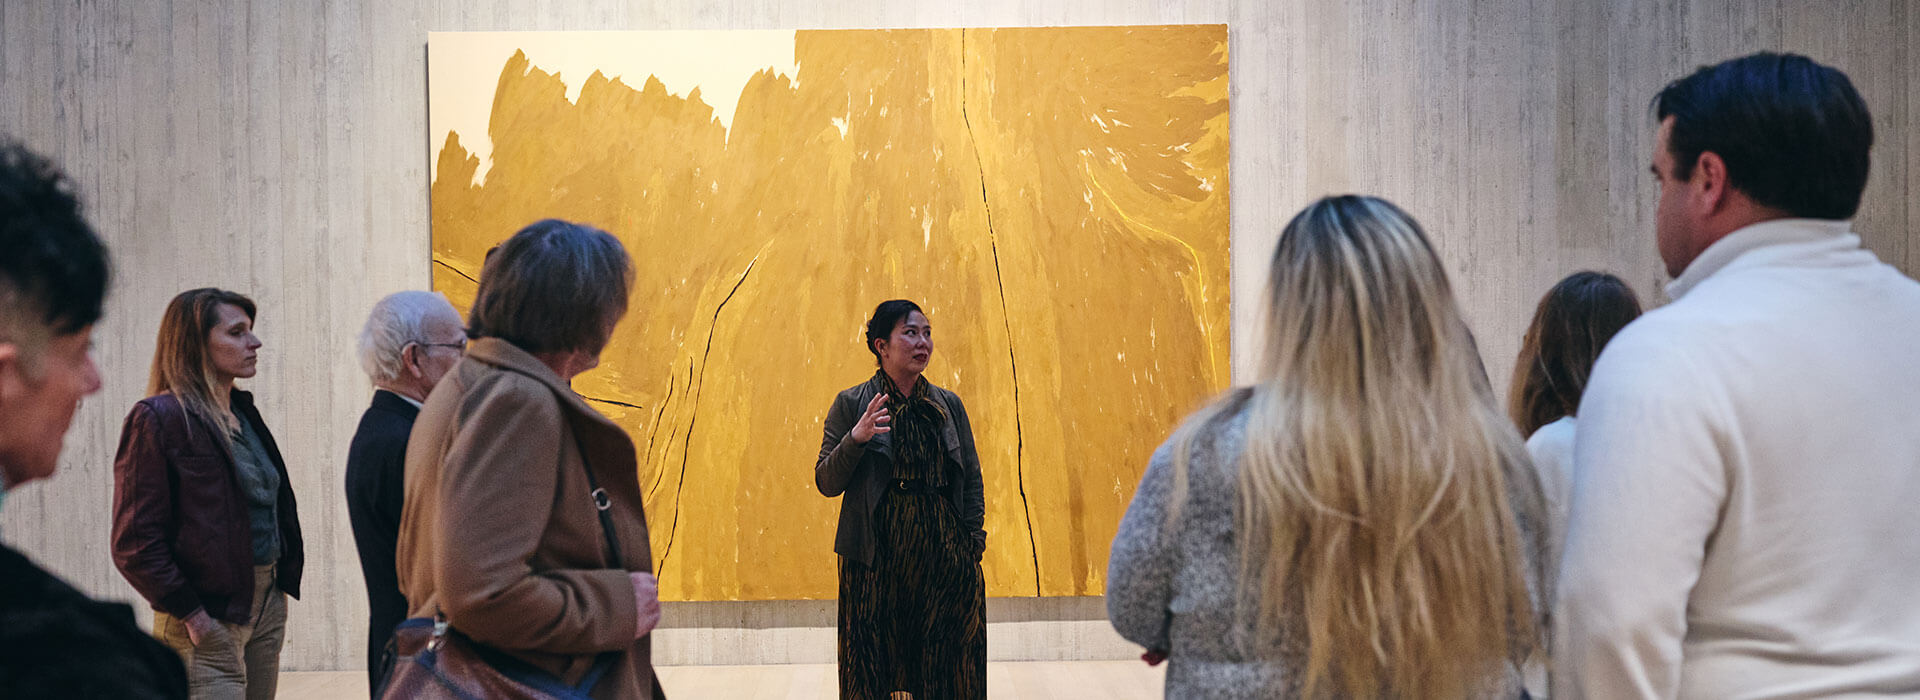 A woman gives a tour in an art gallery to a large group of adults